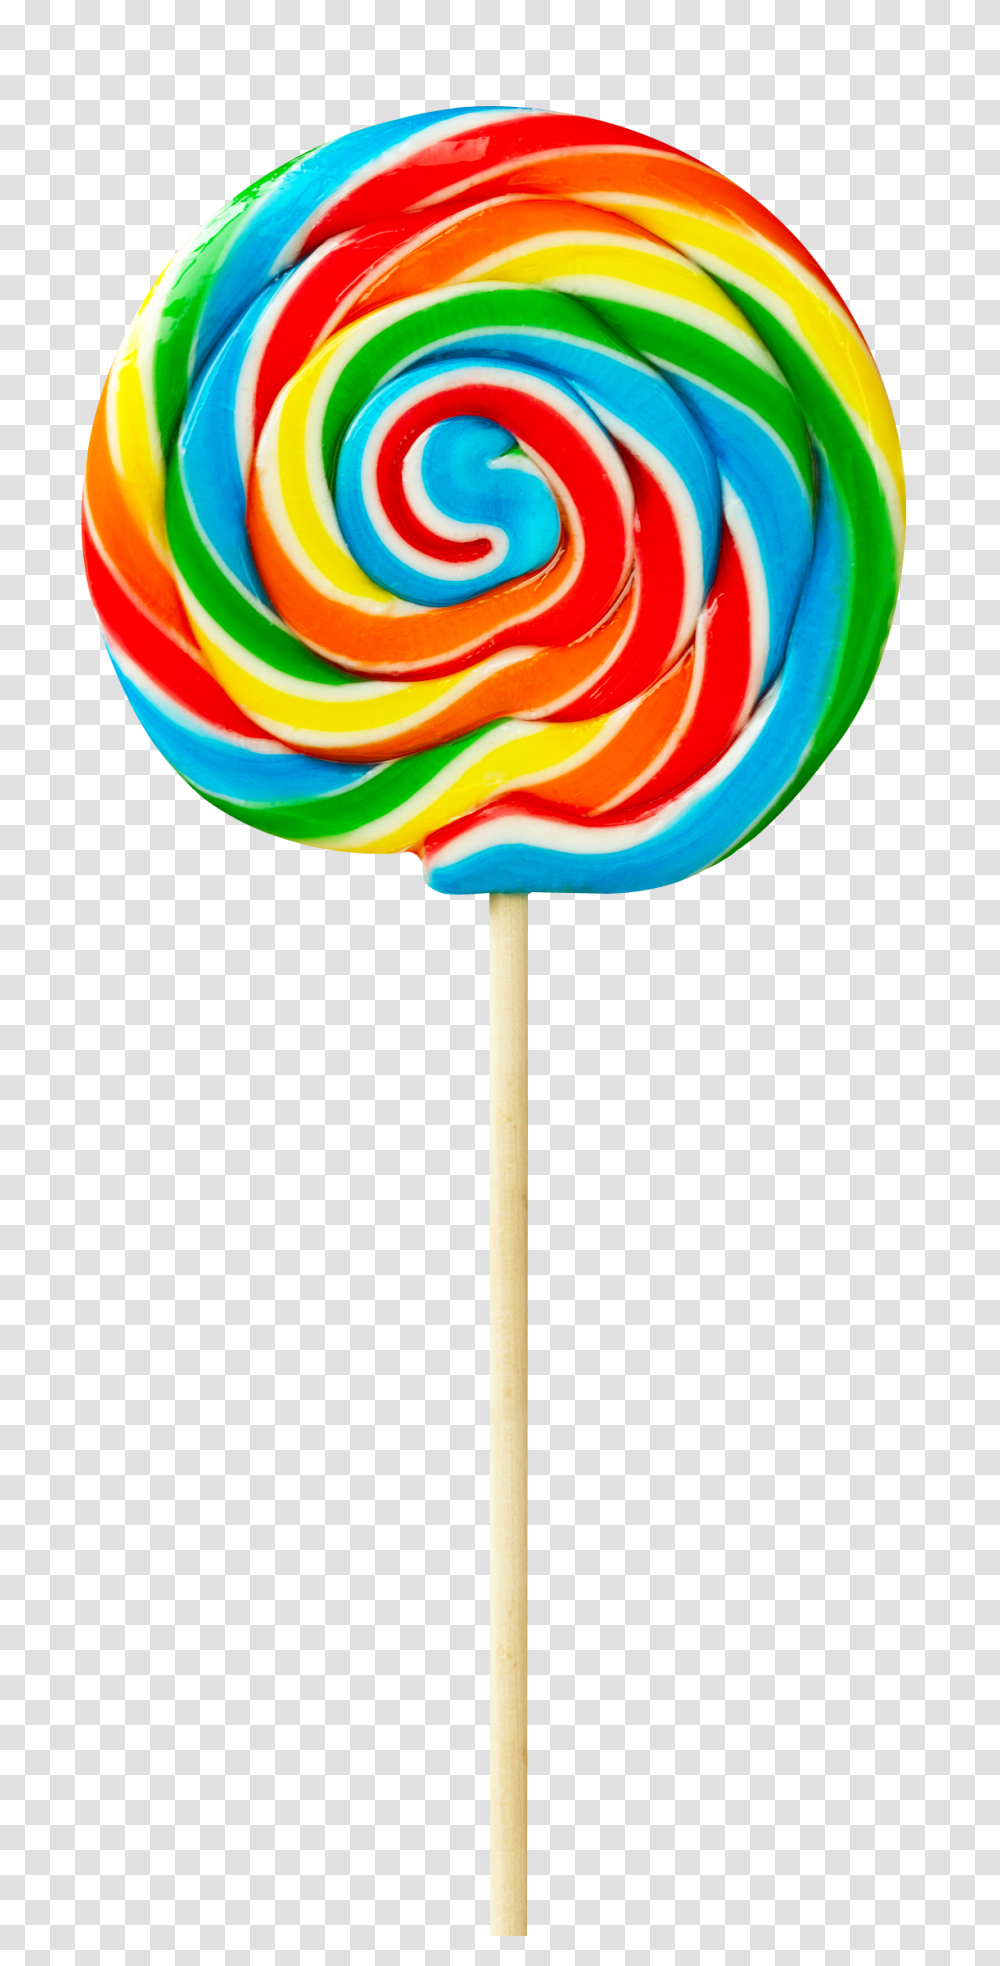 Colorful Lollipop Image, Food, Candy, Balloon Transparent Png